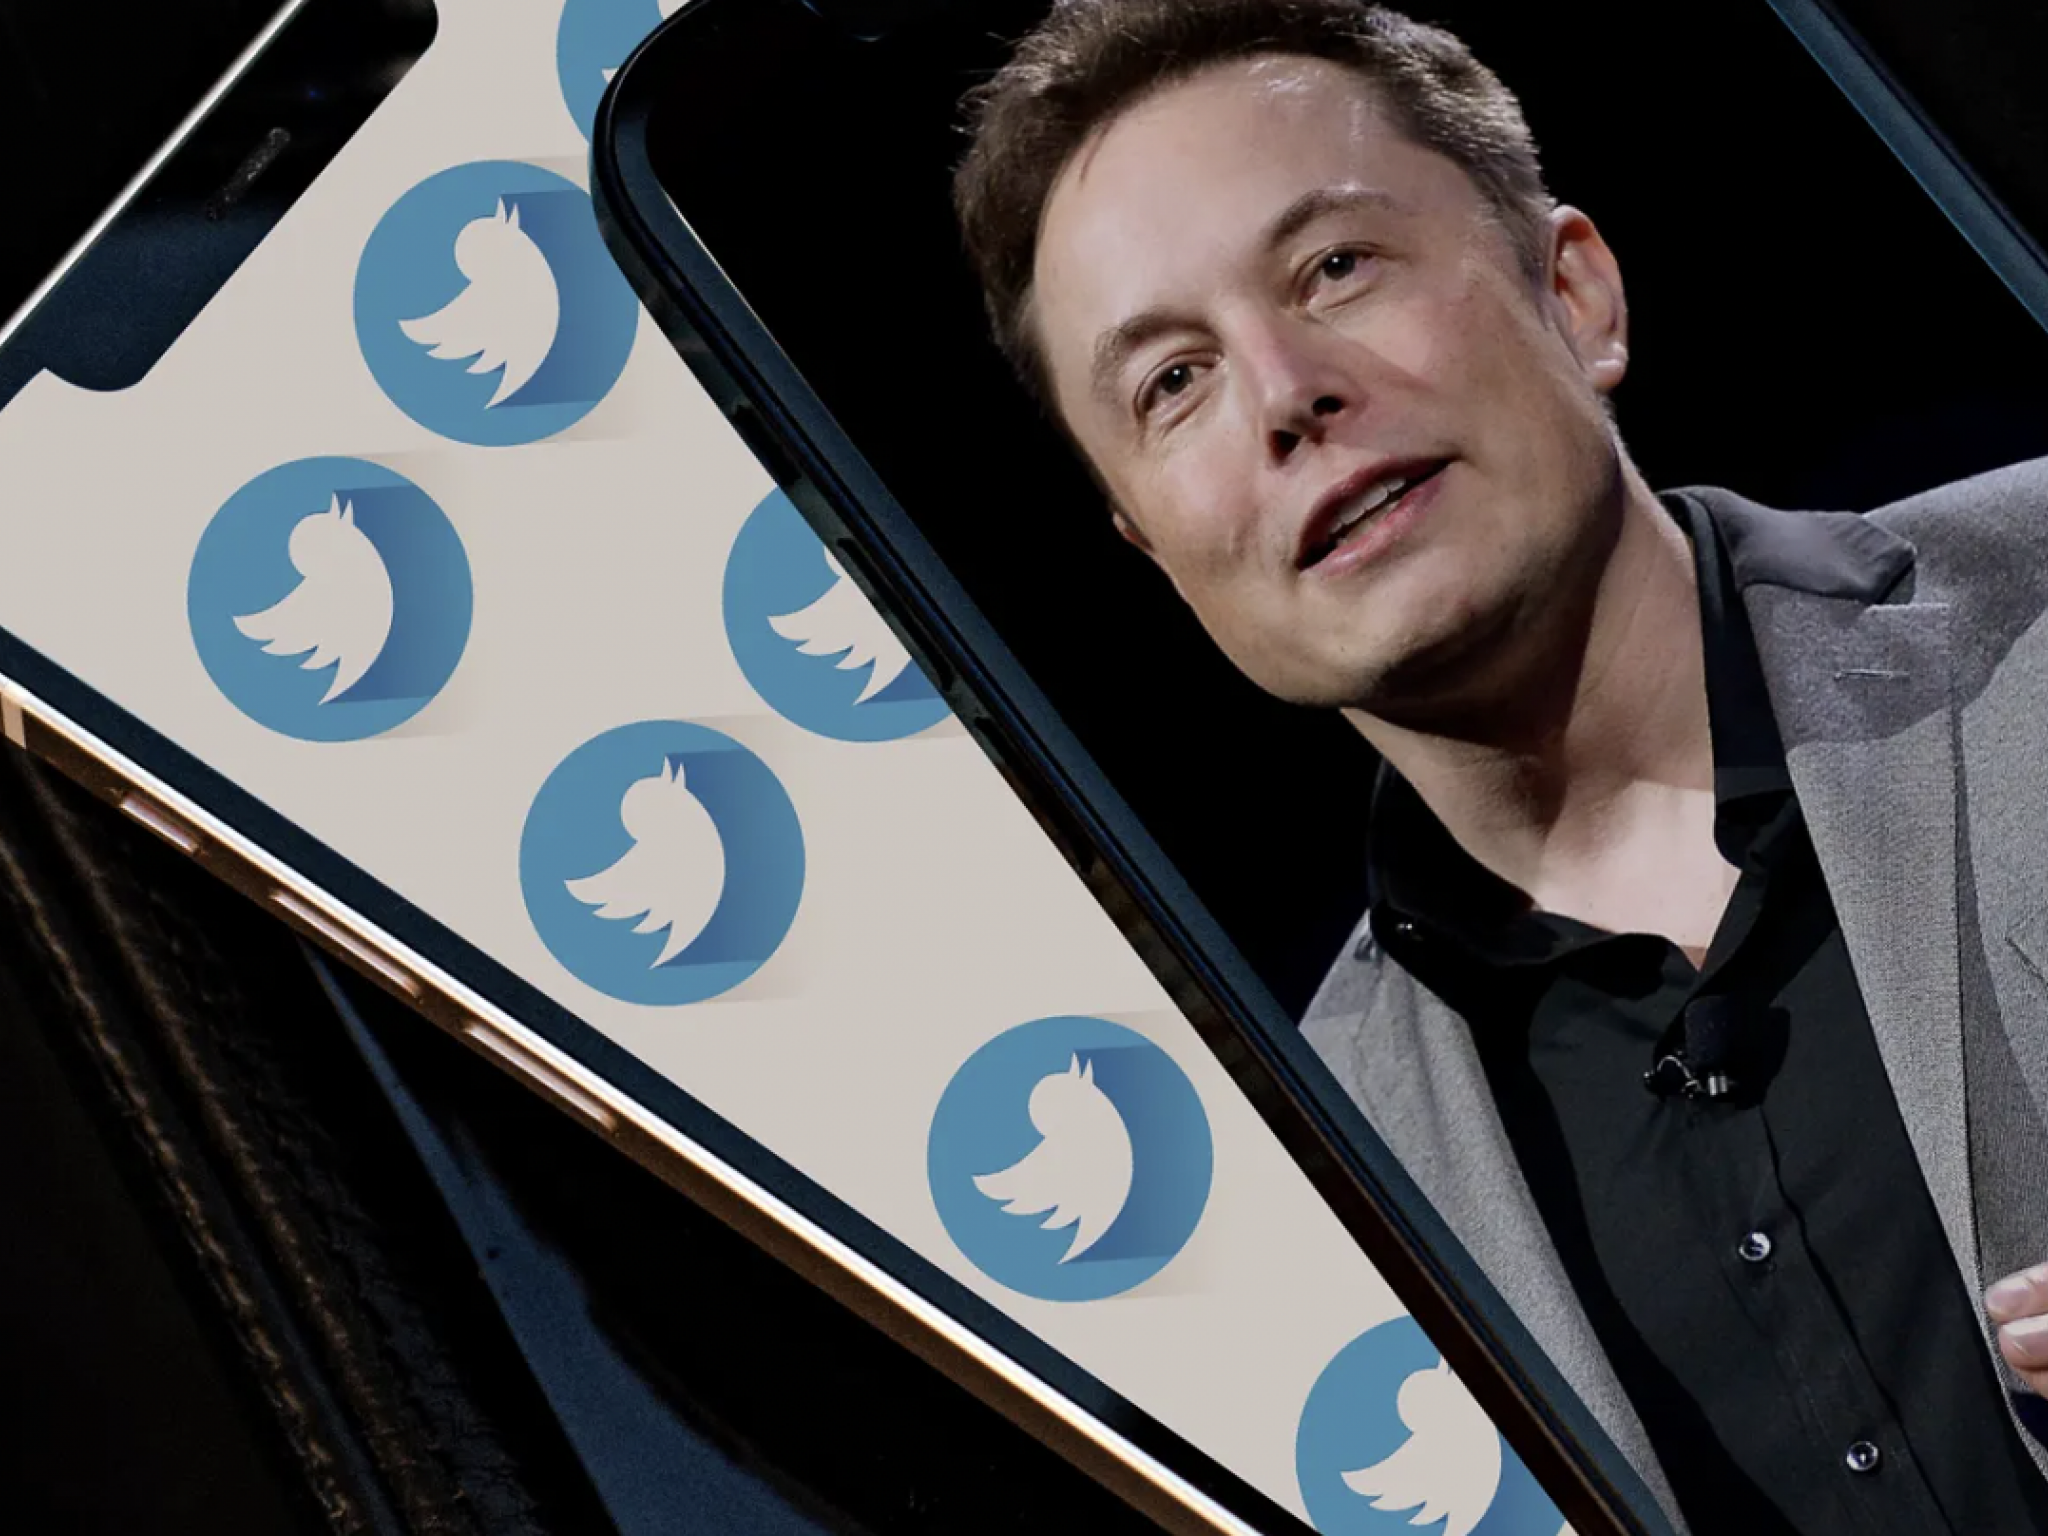  elon-musks-first-tweet-after-twitter-layoffs-no-choice-when-company-is-losing 